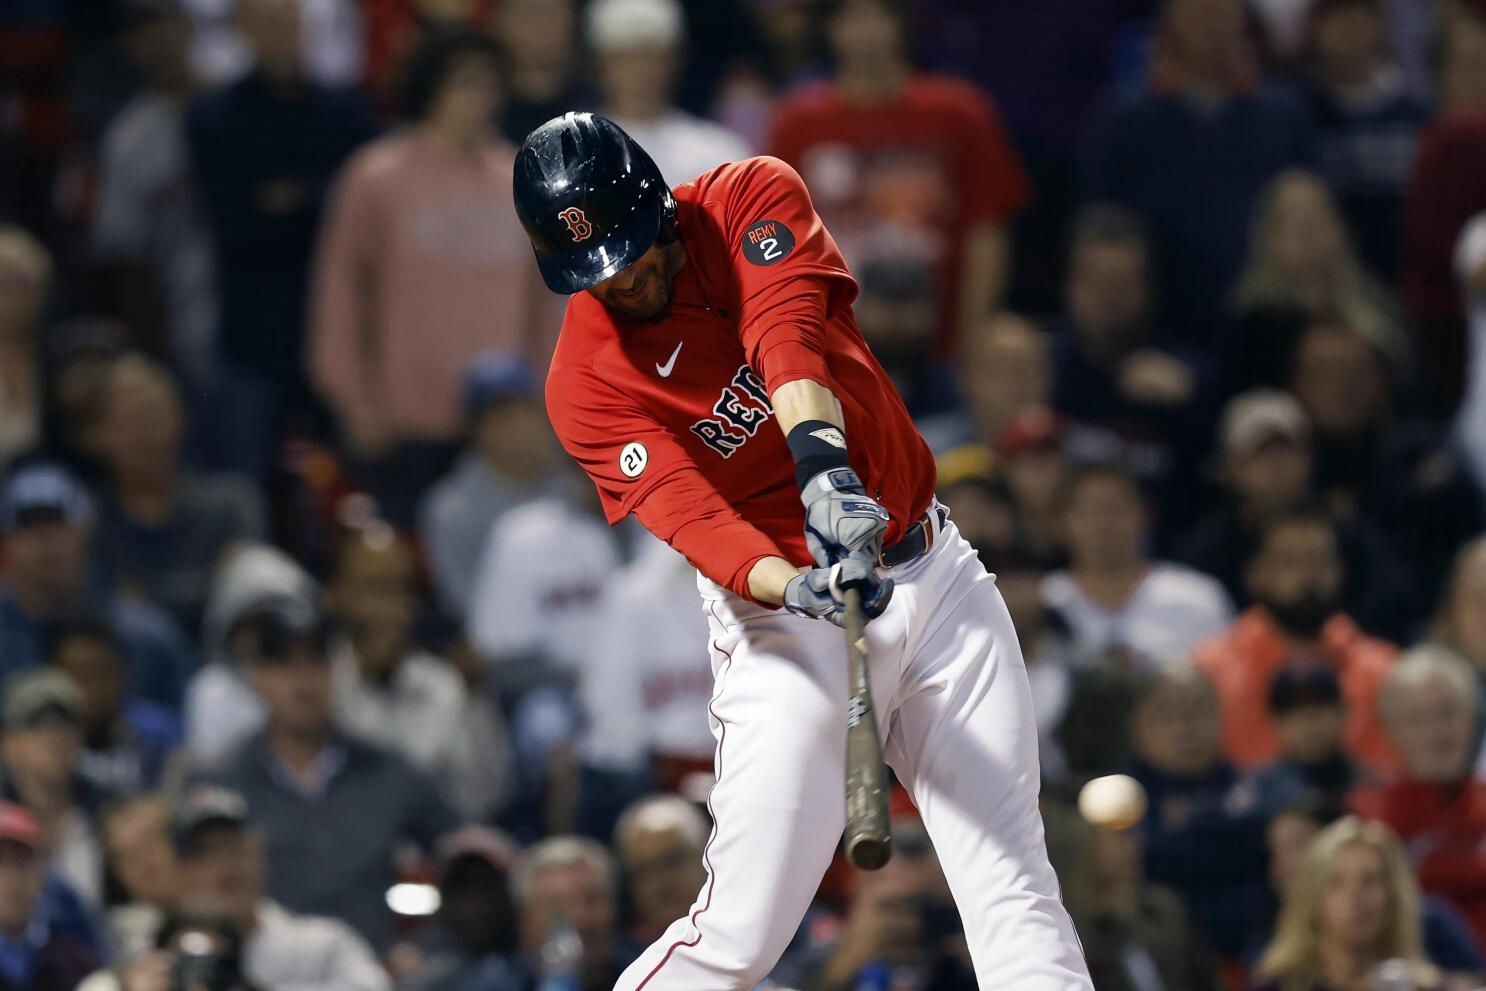 Martinez has RBI single in 8th, Red Sox beat Royals 2-1